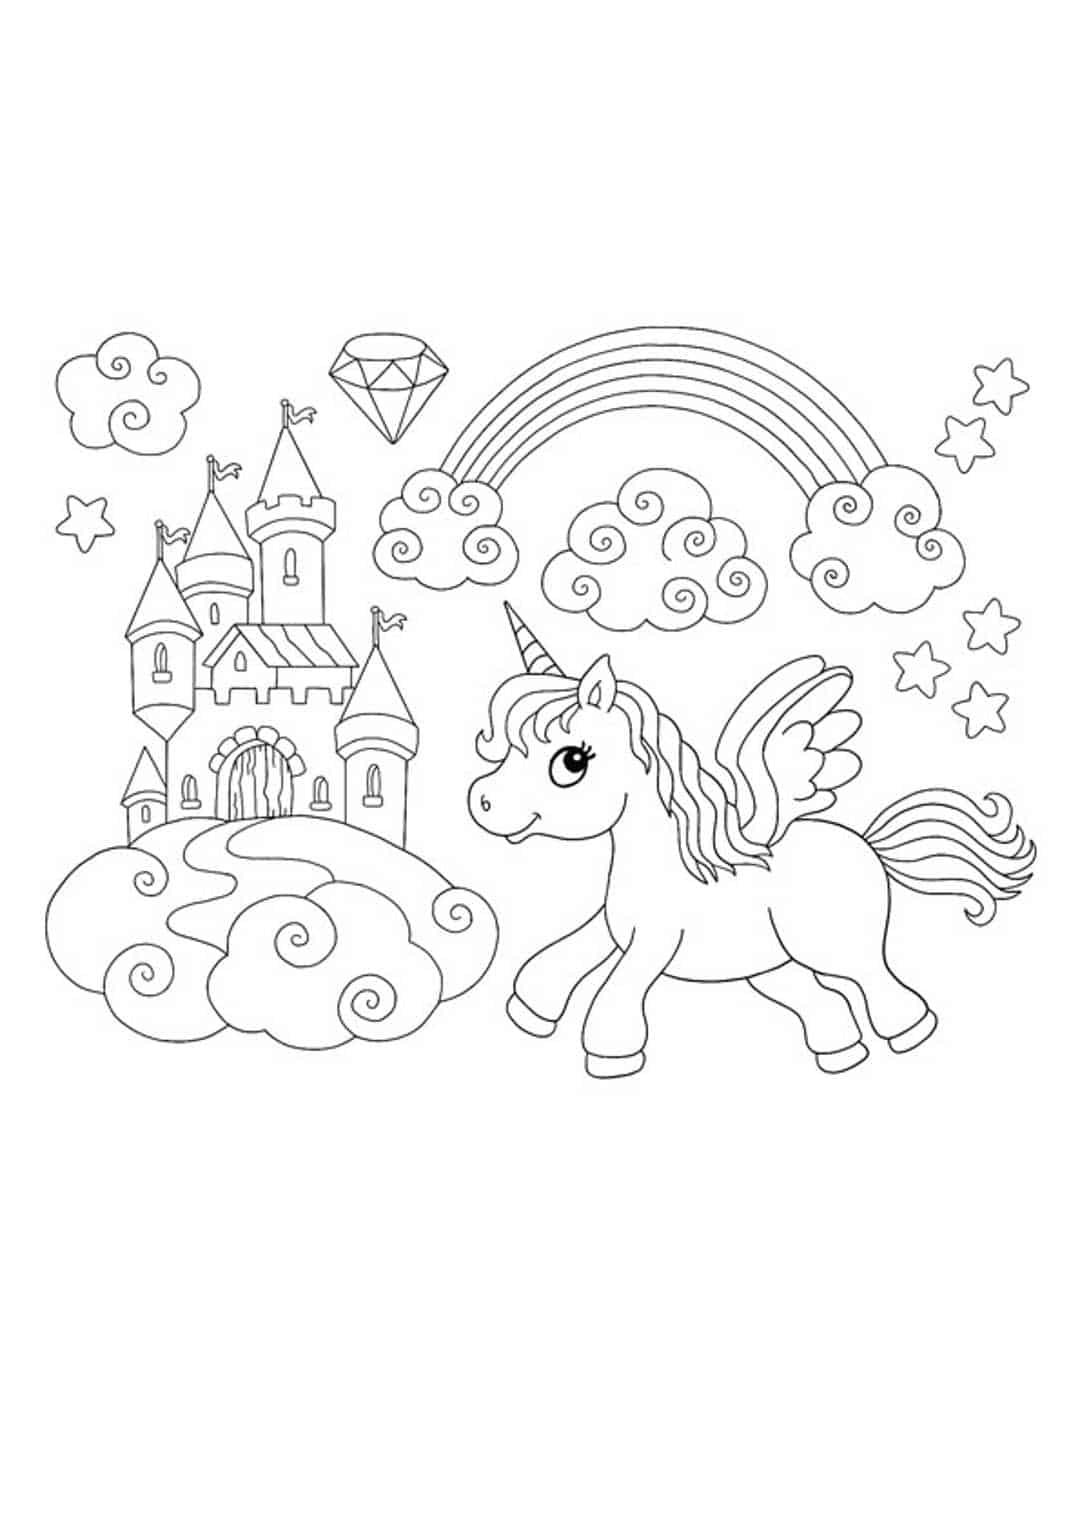 Winged unicorn rainbow coloring page